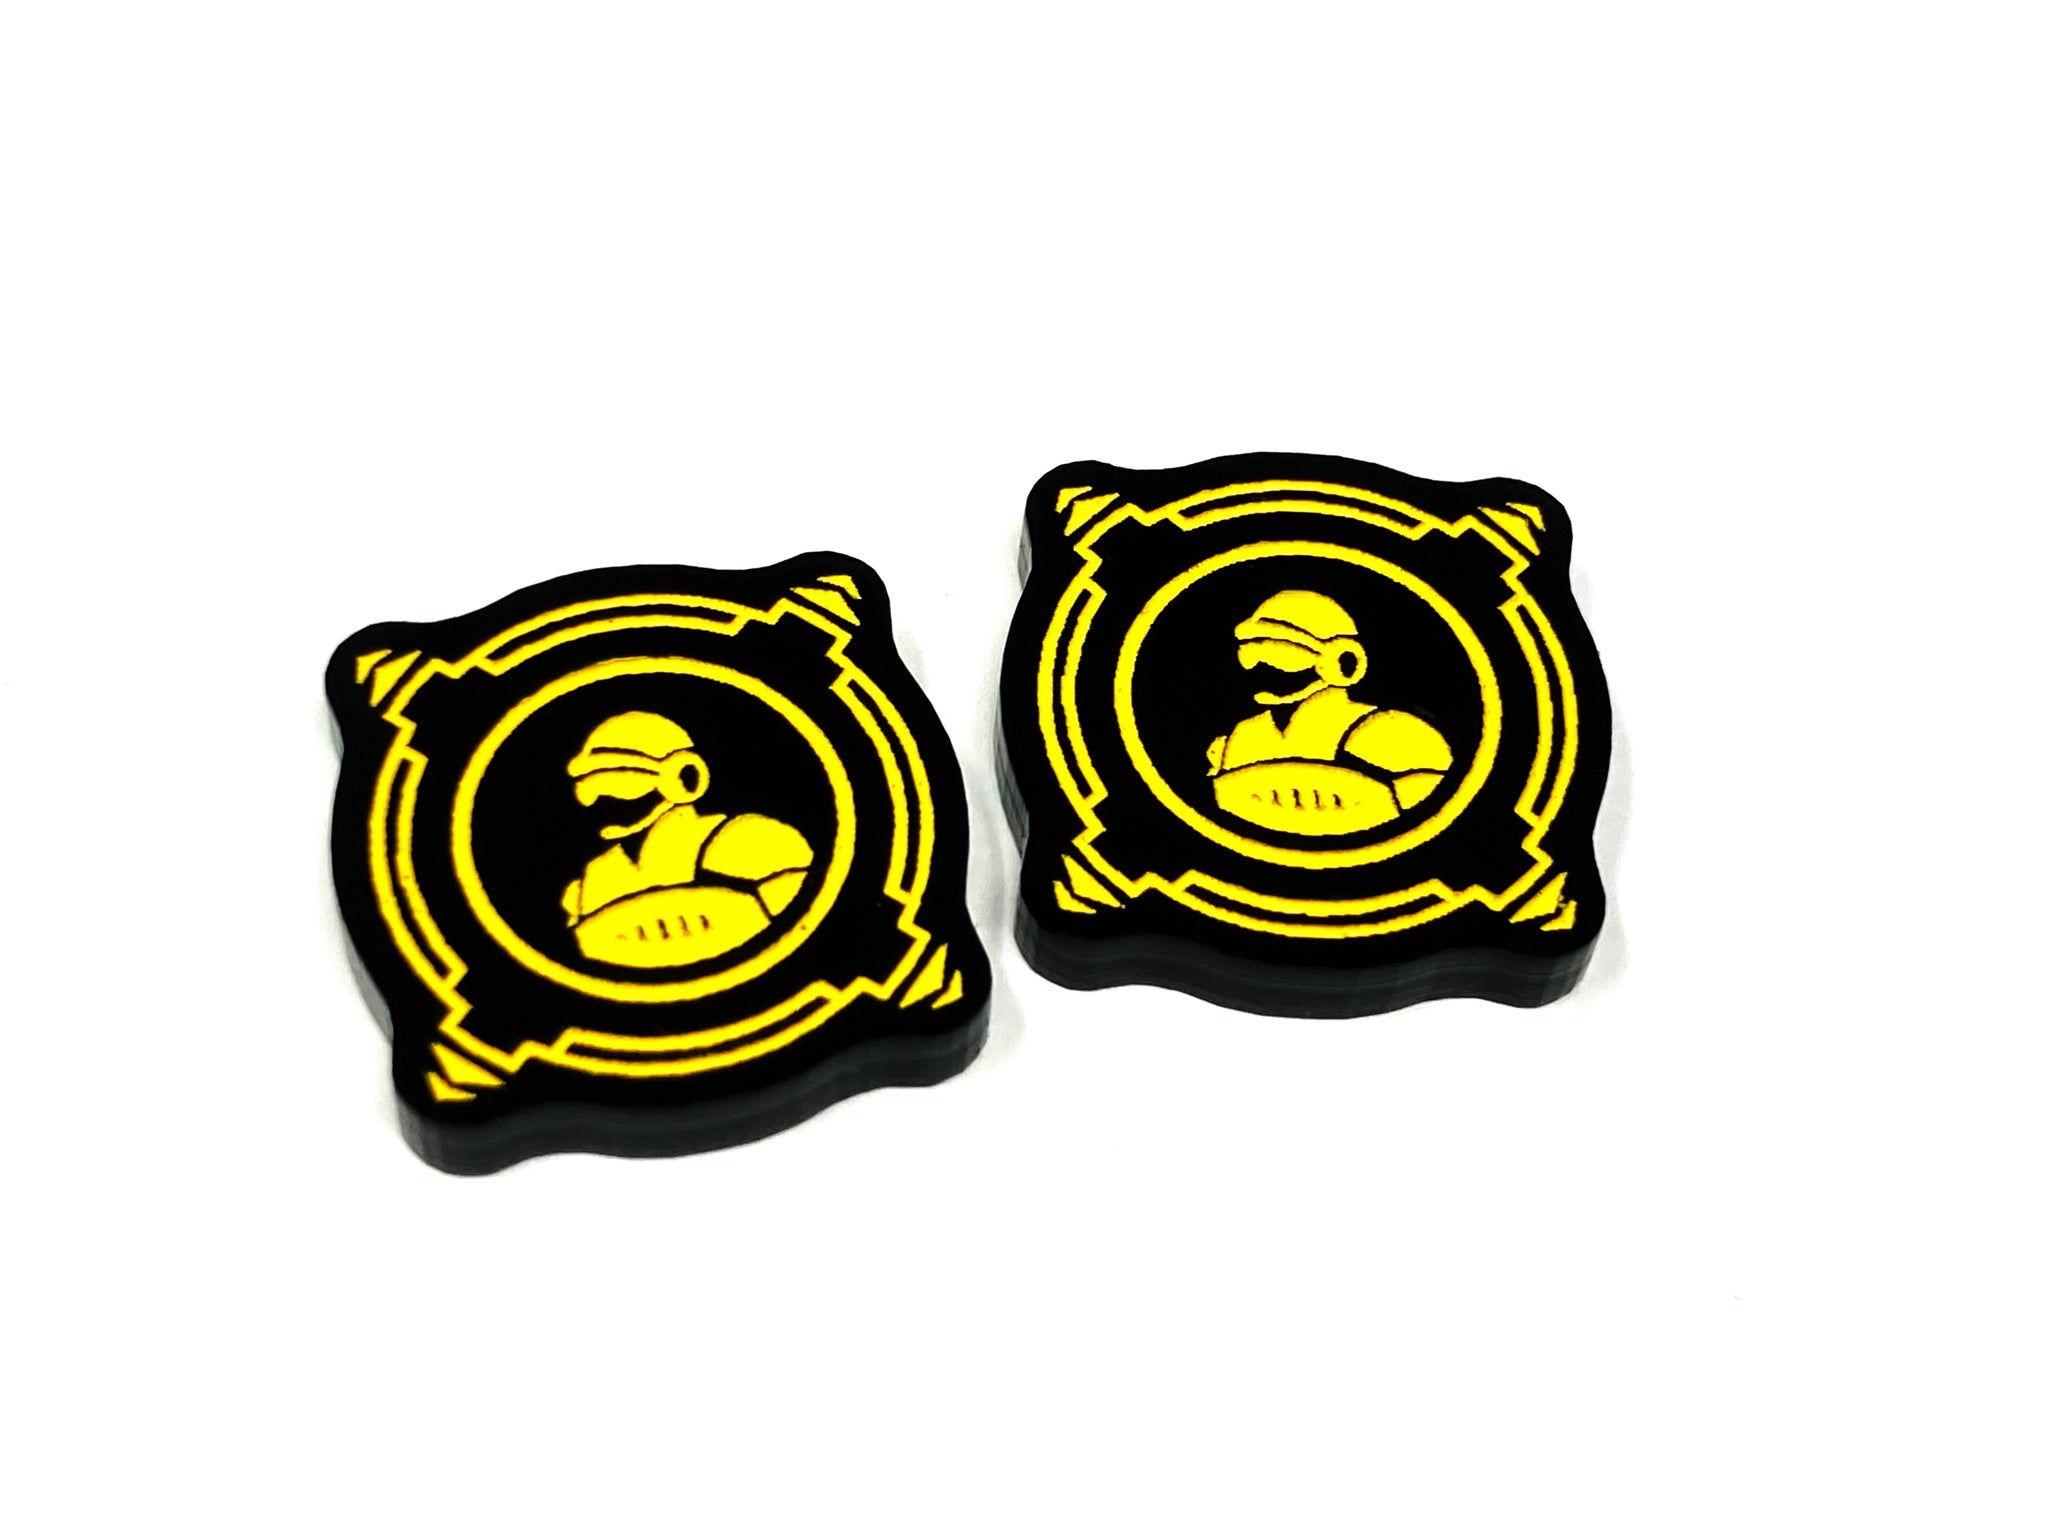 2 x Crew Charge Tokens - Black Series (Double Sided)